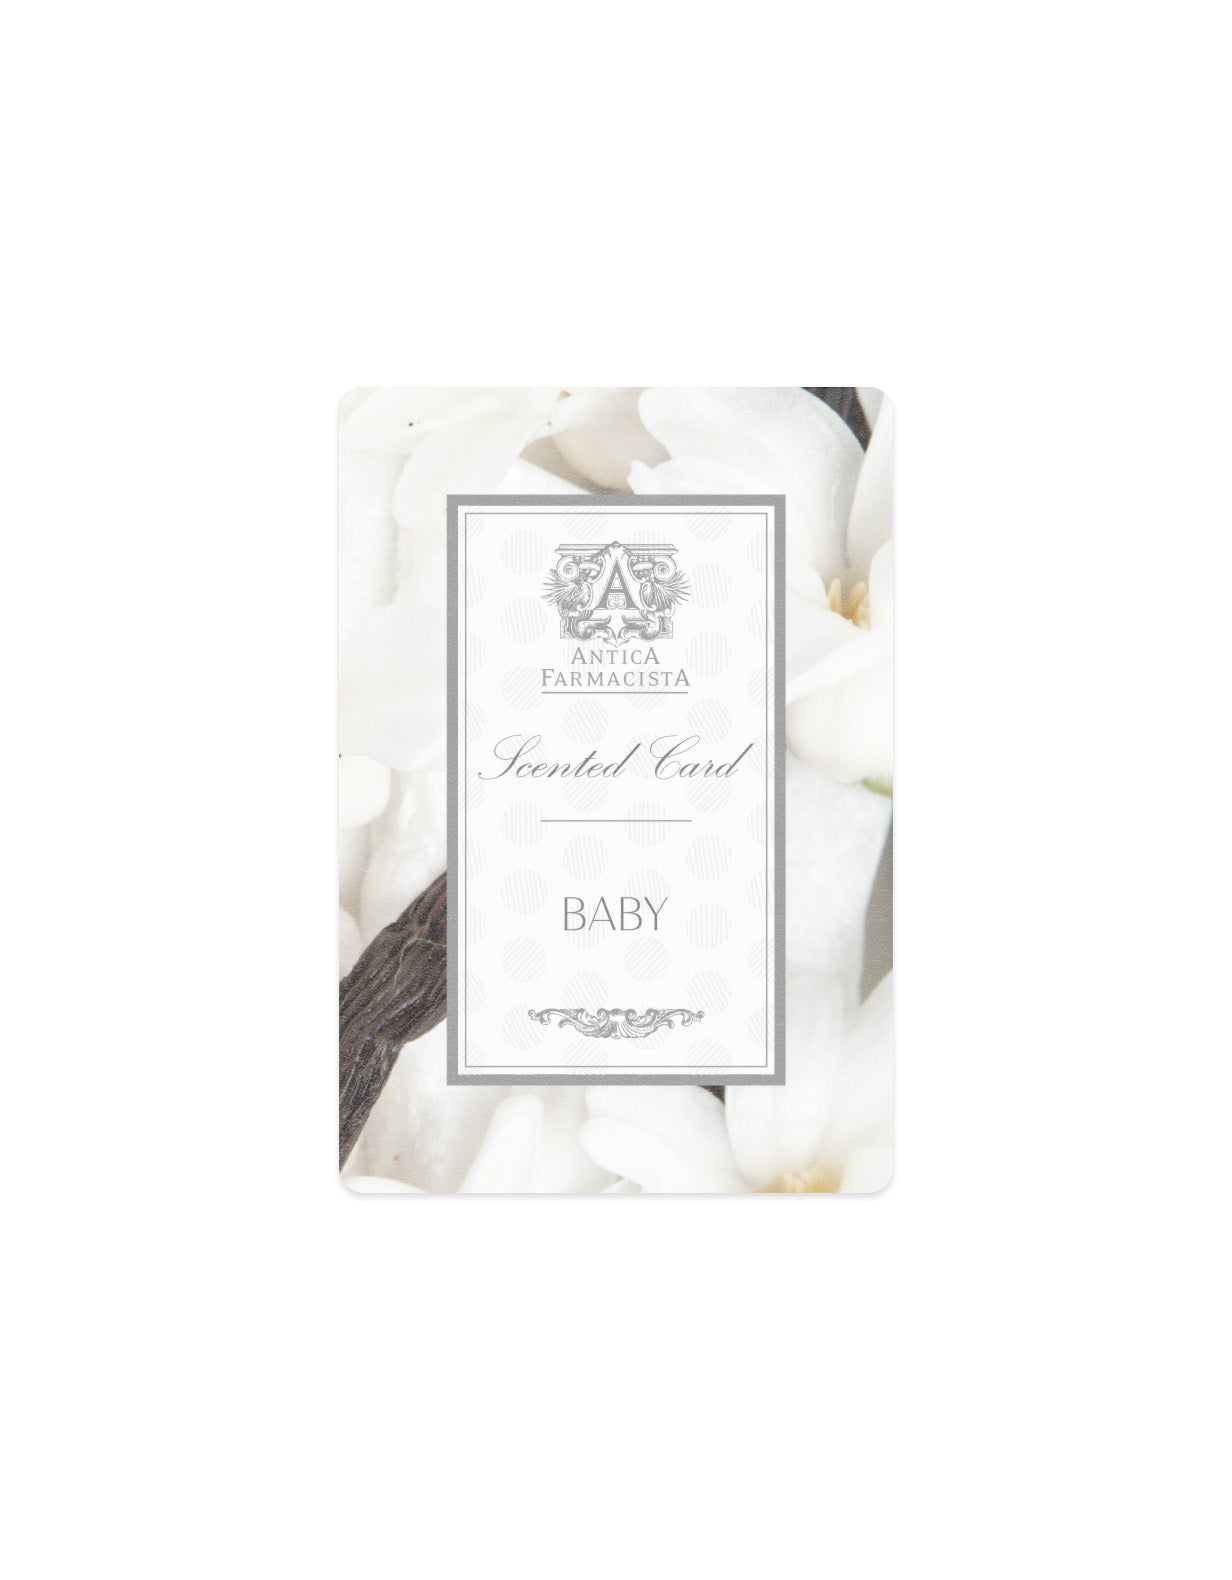 GWP - Scented Card - Baby